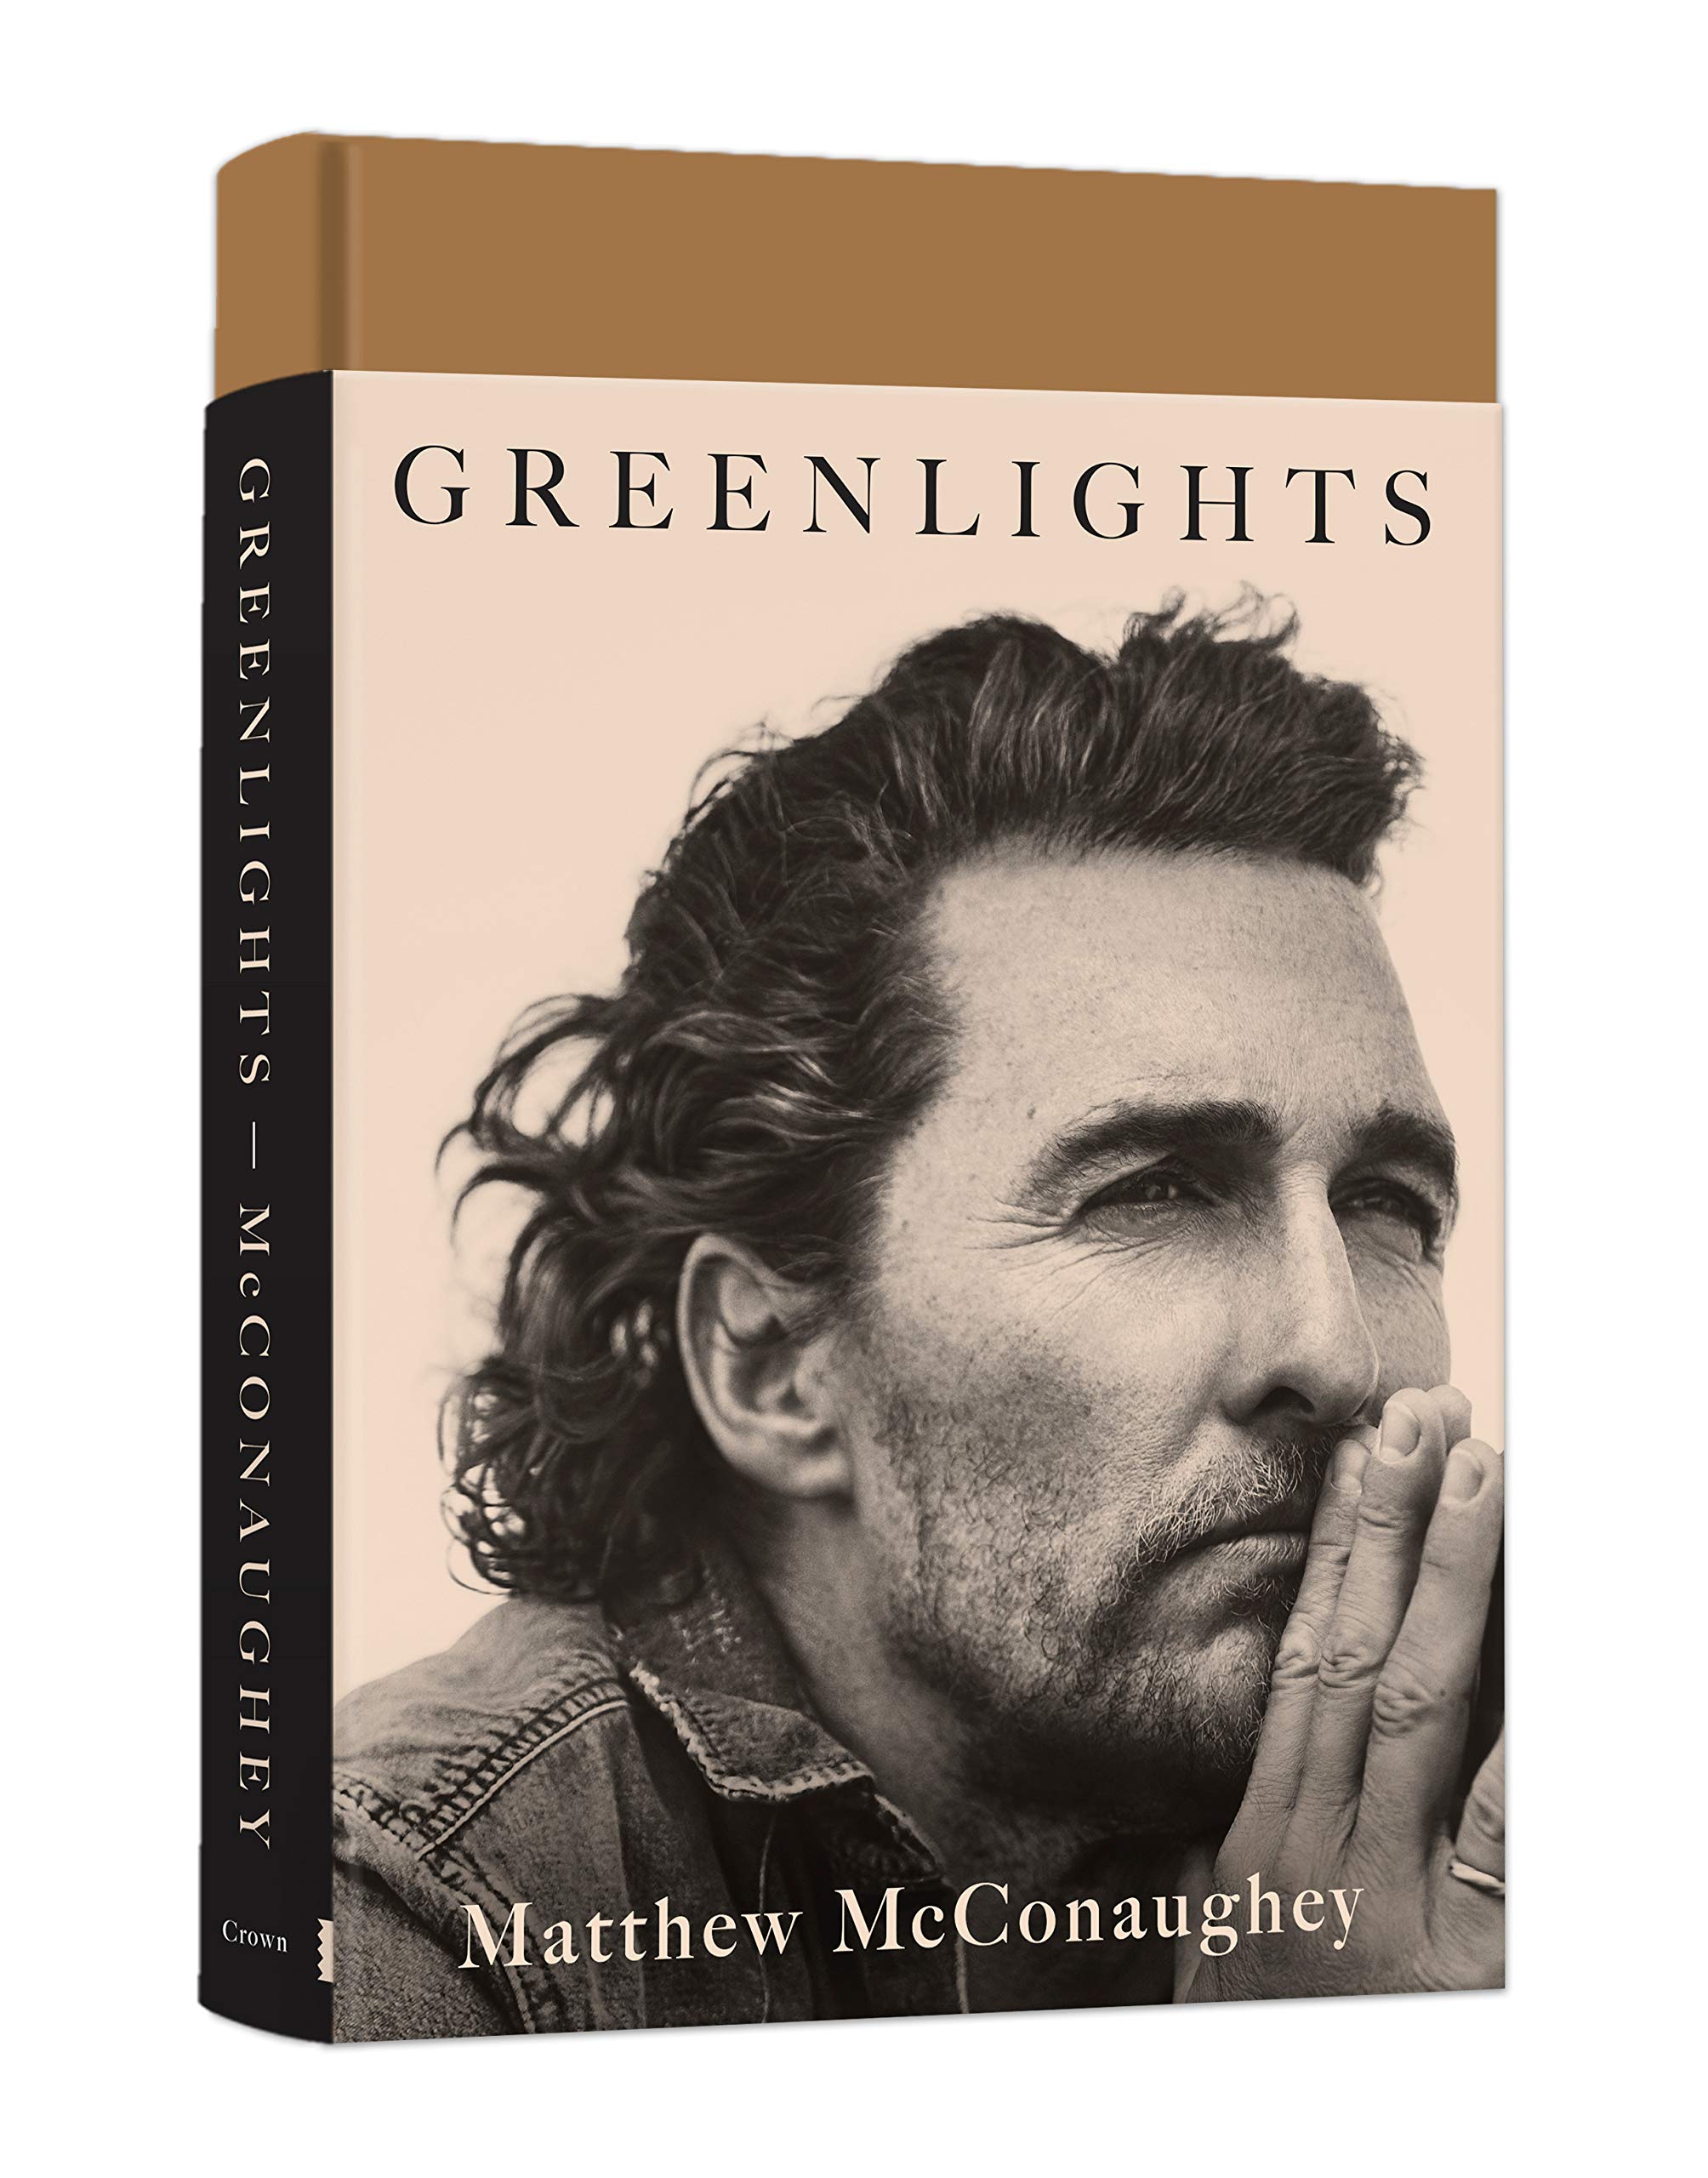 "Greenlights" cover